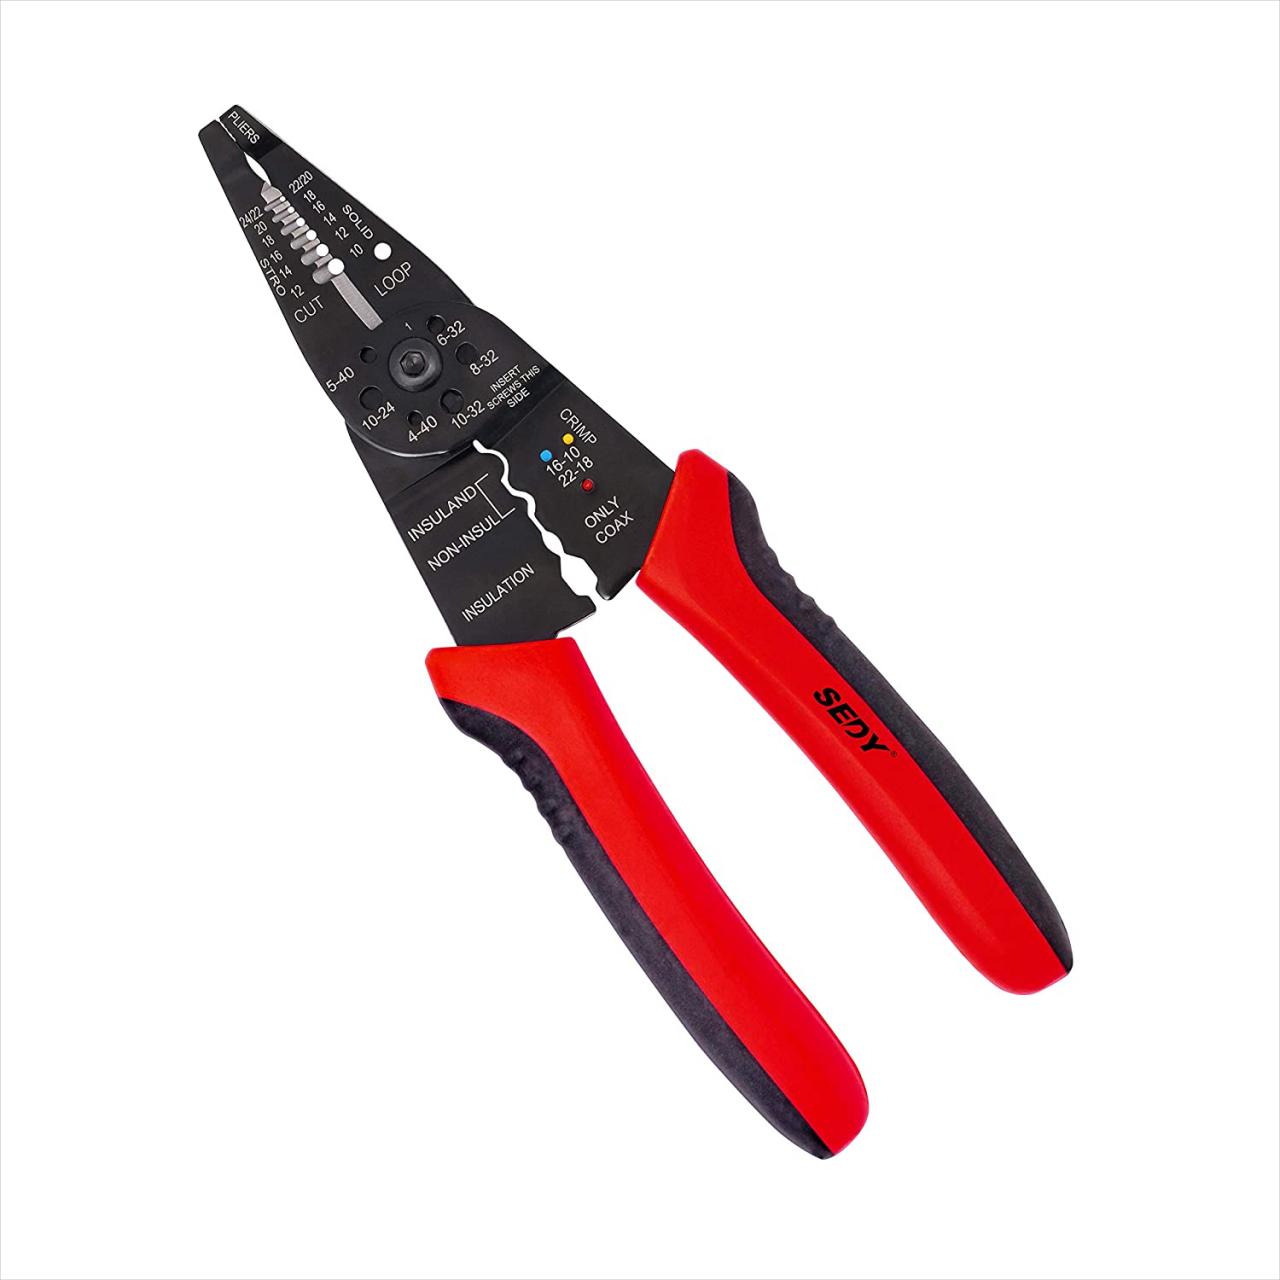 WGGE WG-015 Professional crimping tool Multi-Tool Wire Stripper/Cutter/Crimper  Hand Crimpers & Strippers Business & Industrial